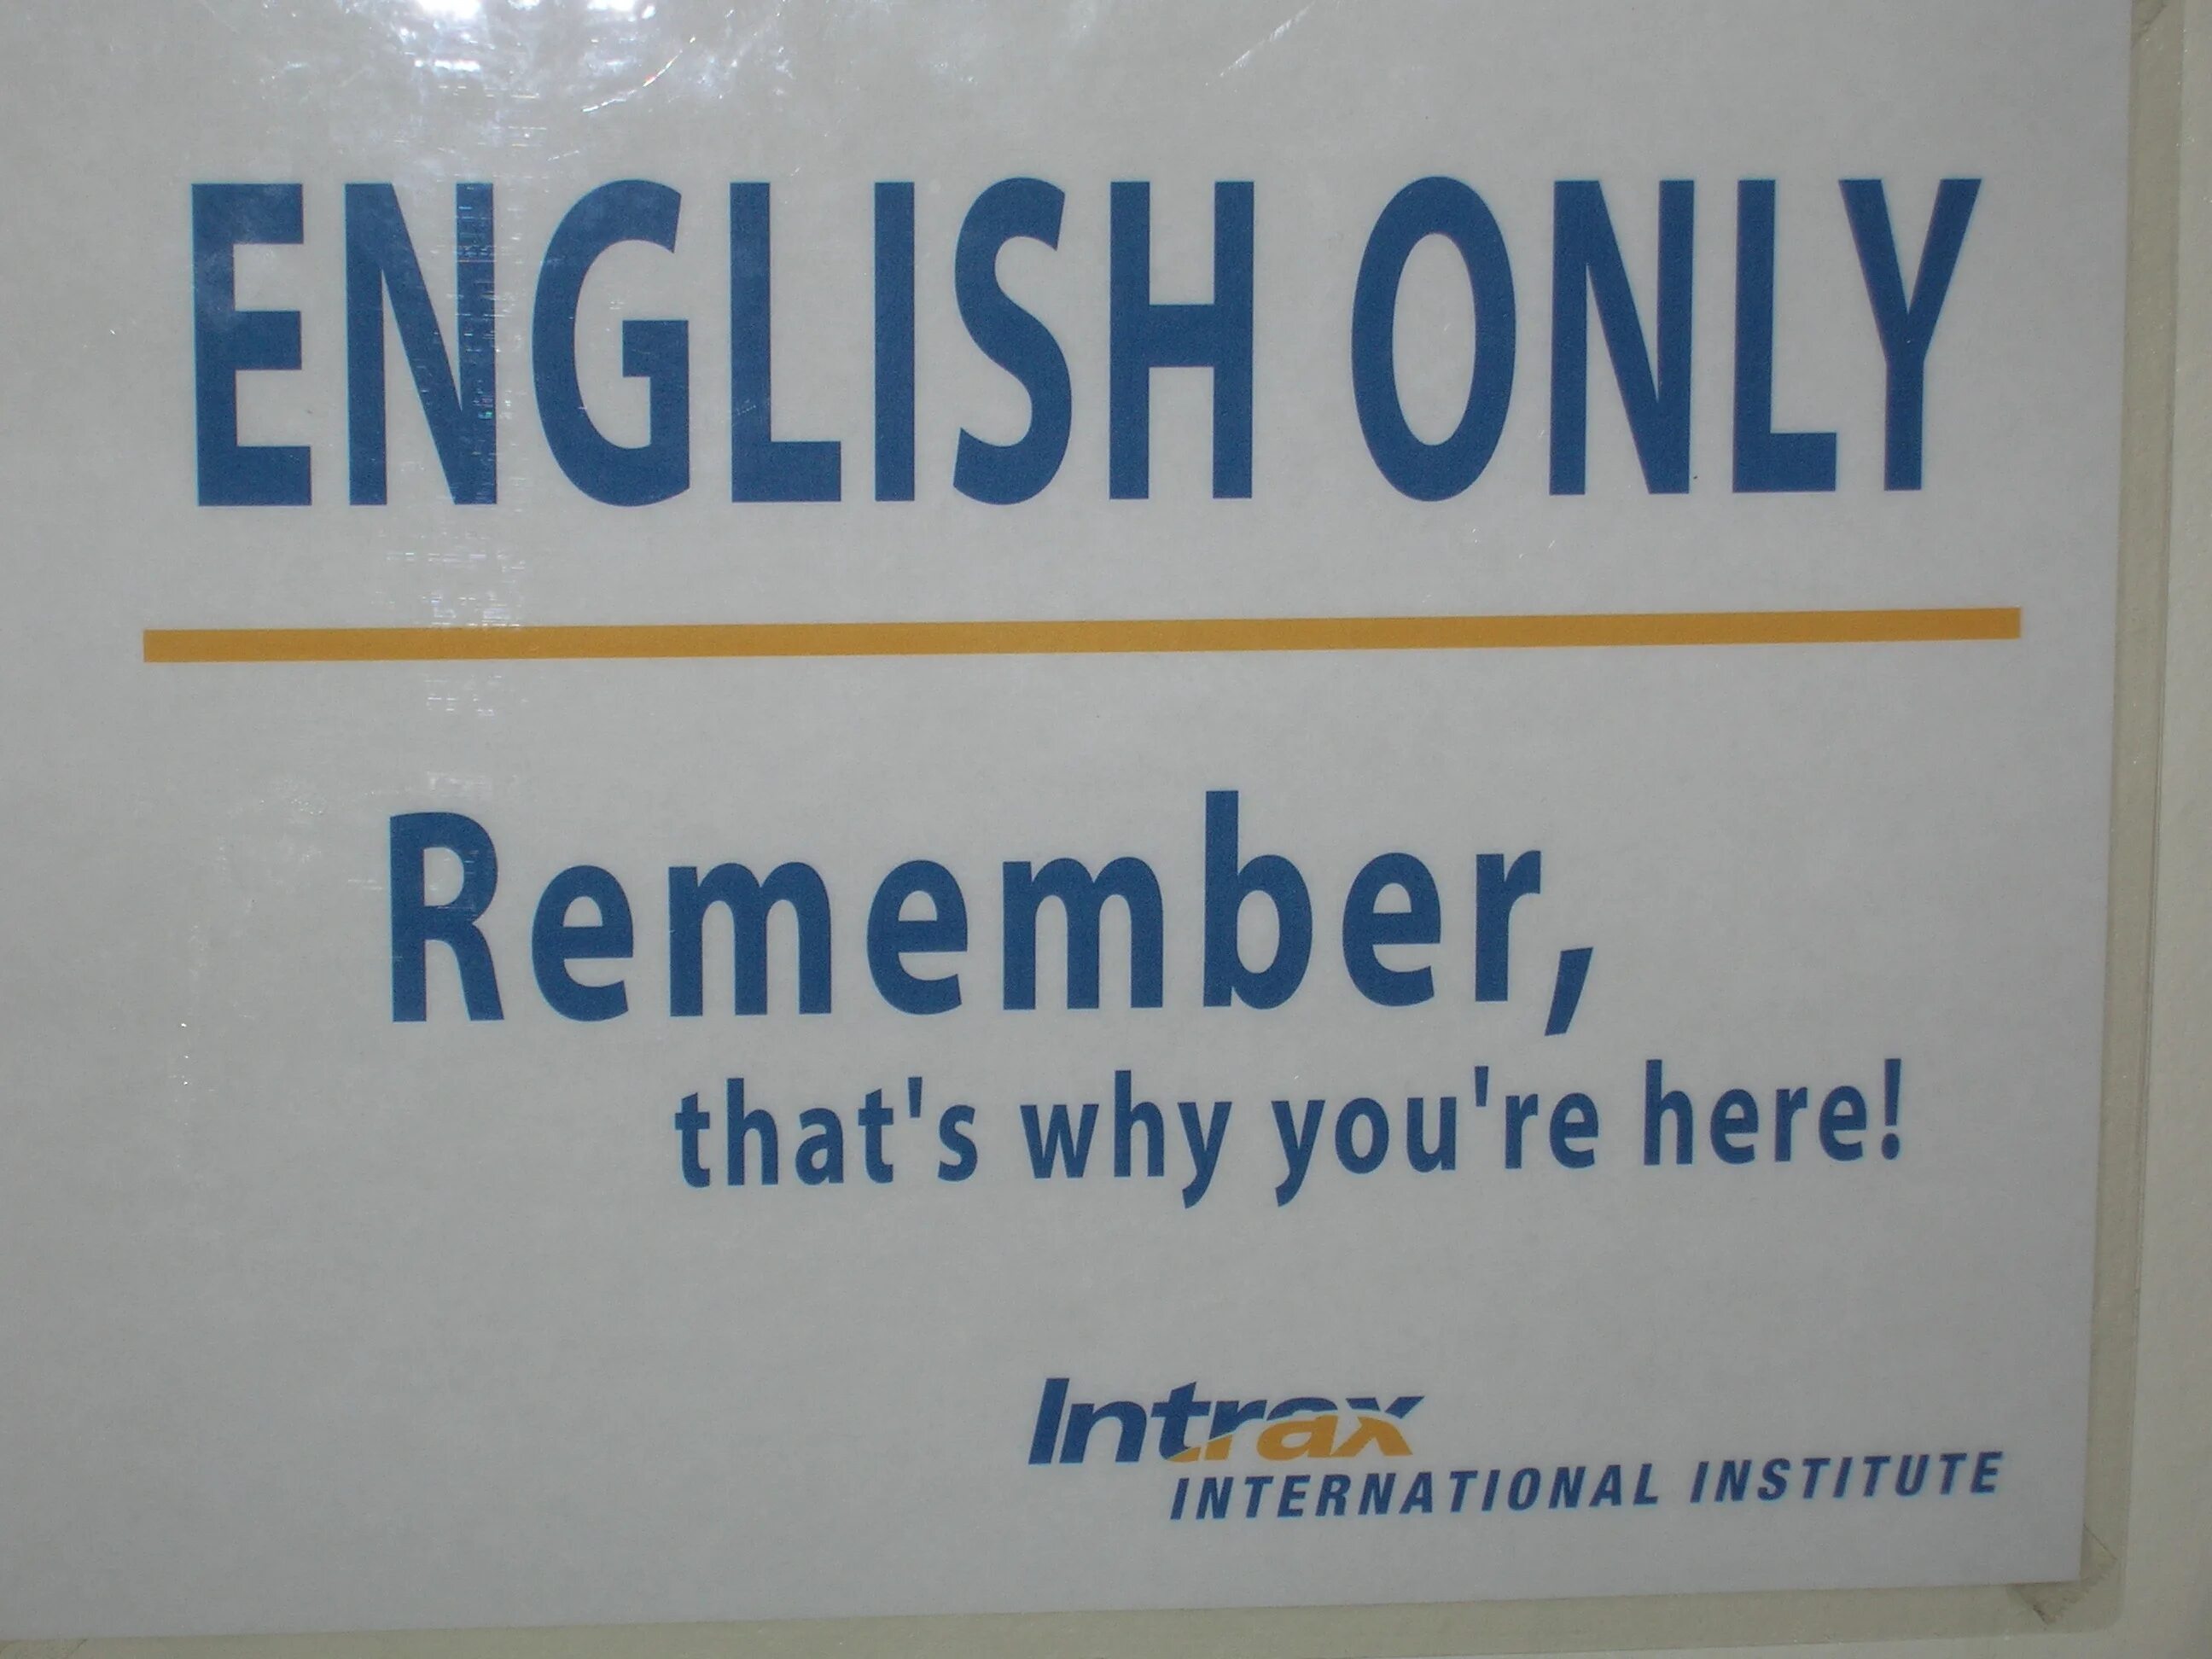 Движение English-only. English only. Speak only English. English only sign. English spoken here